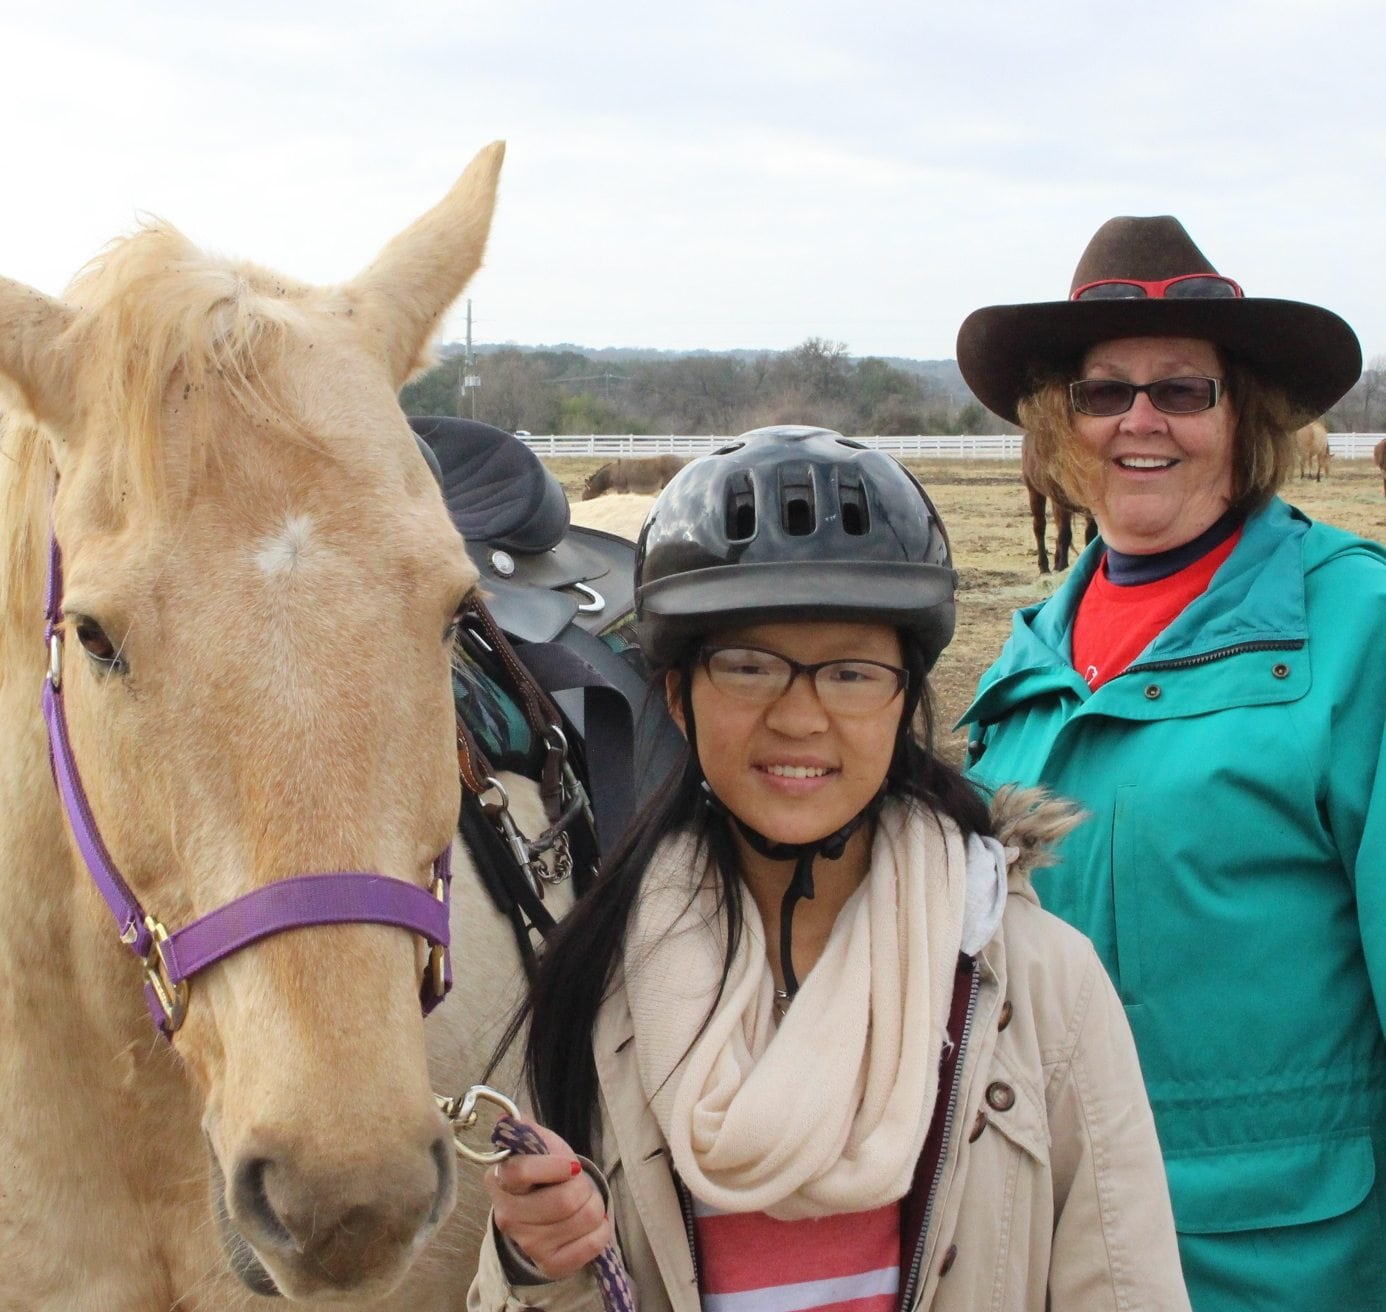 A young woman holds on to a horse's bridle while standing next to her volunteer riding instructor.